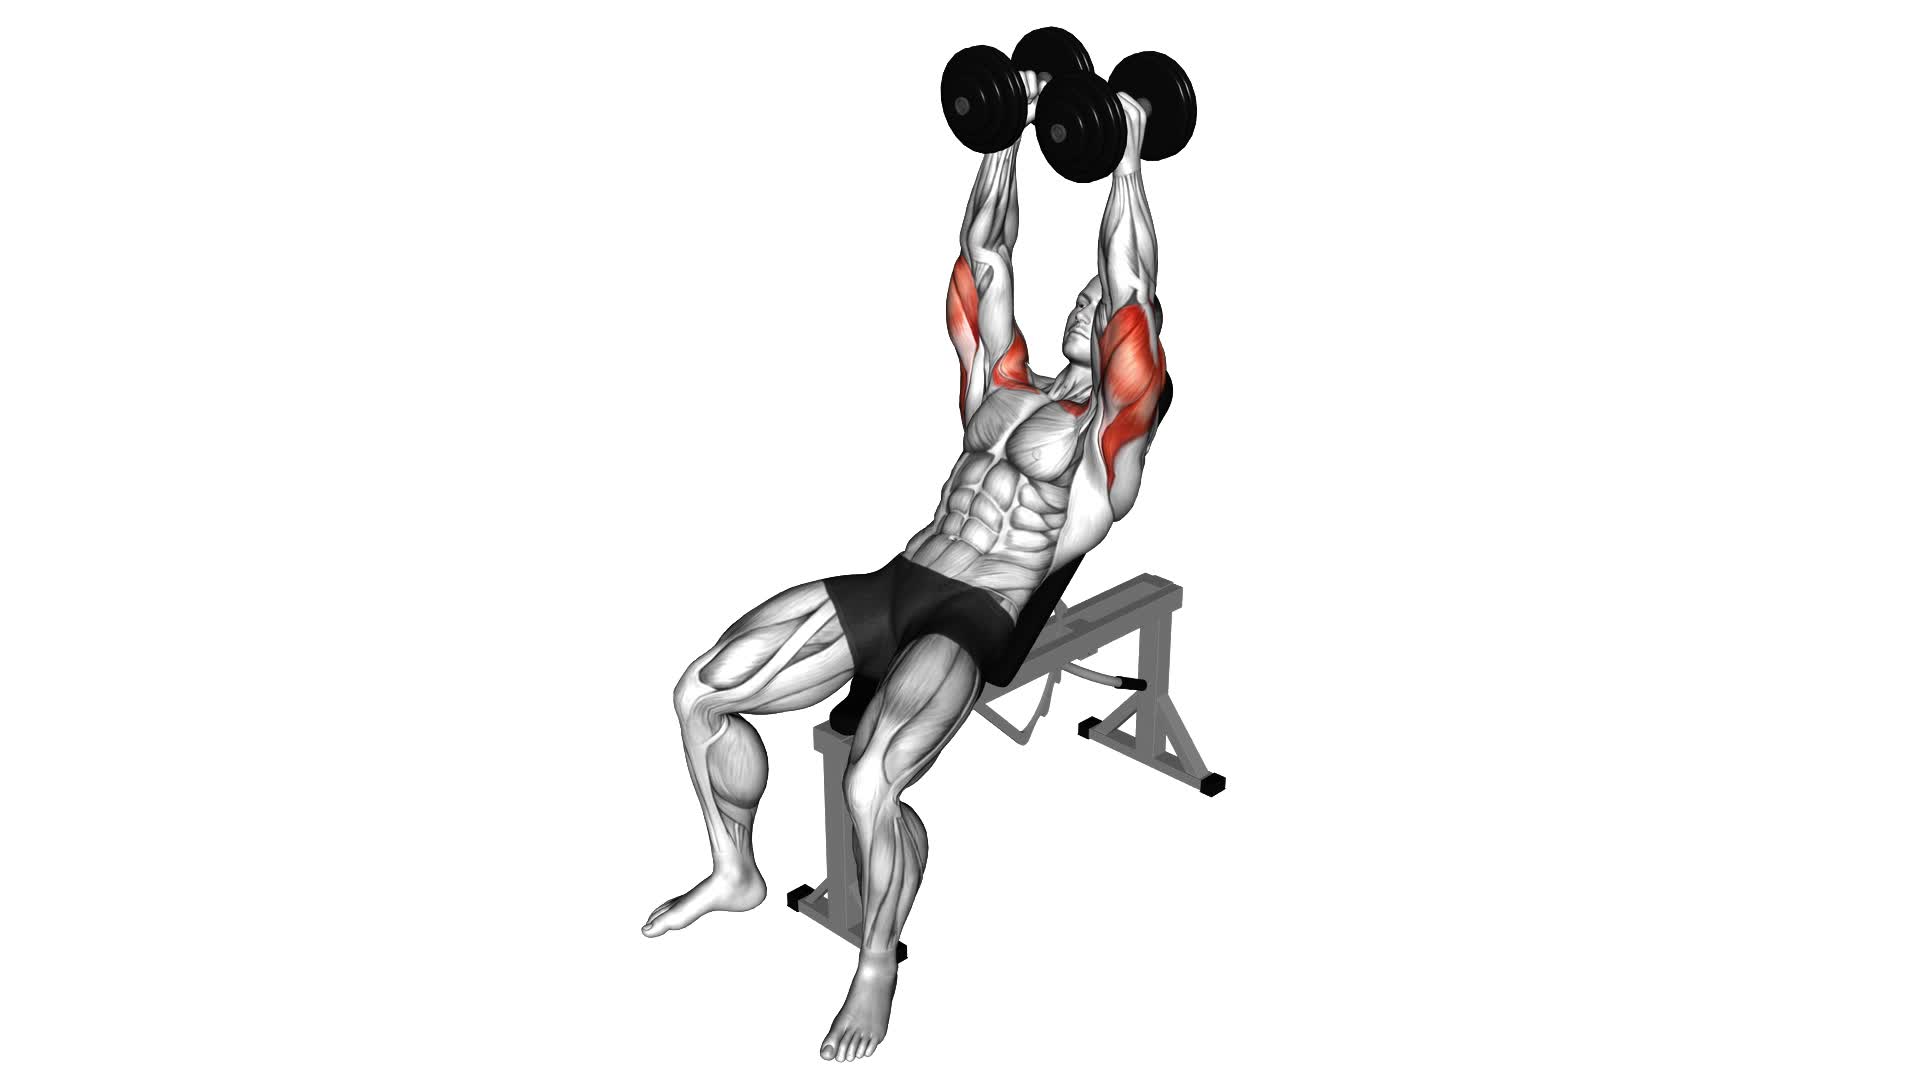 Dumbbell Palms-In Incline Bench Press - Video Exercise Guide & Tips